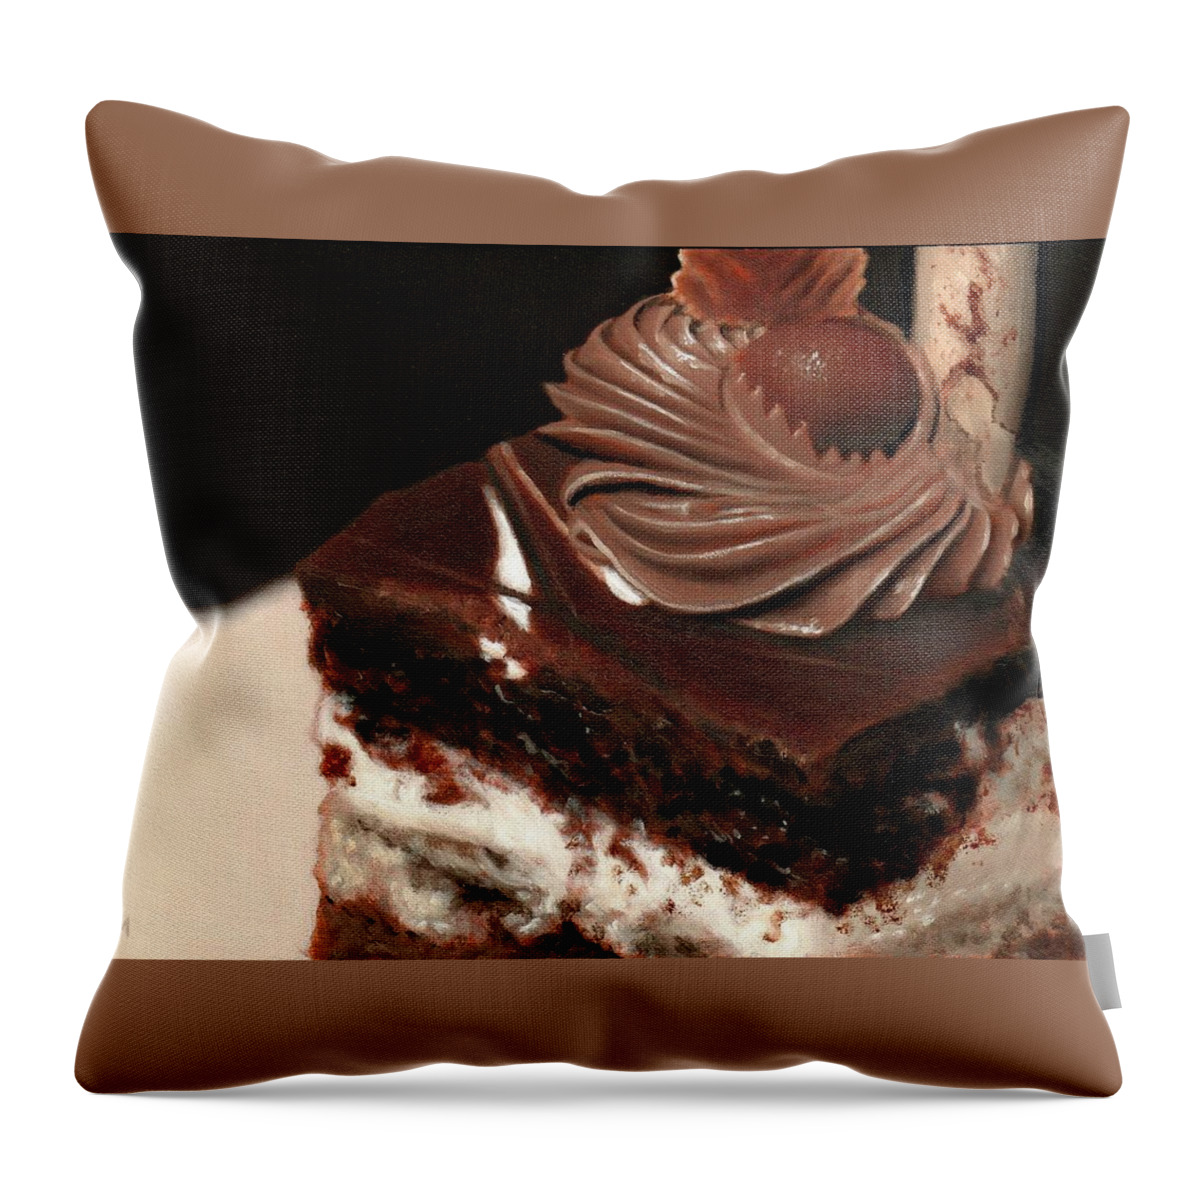 Chocolate Throw Pillow featuring the painting A Piece of Cake by Linda Merchant